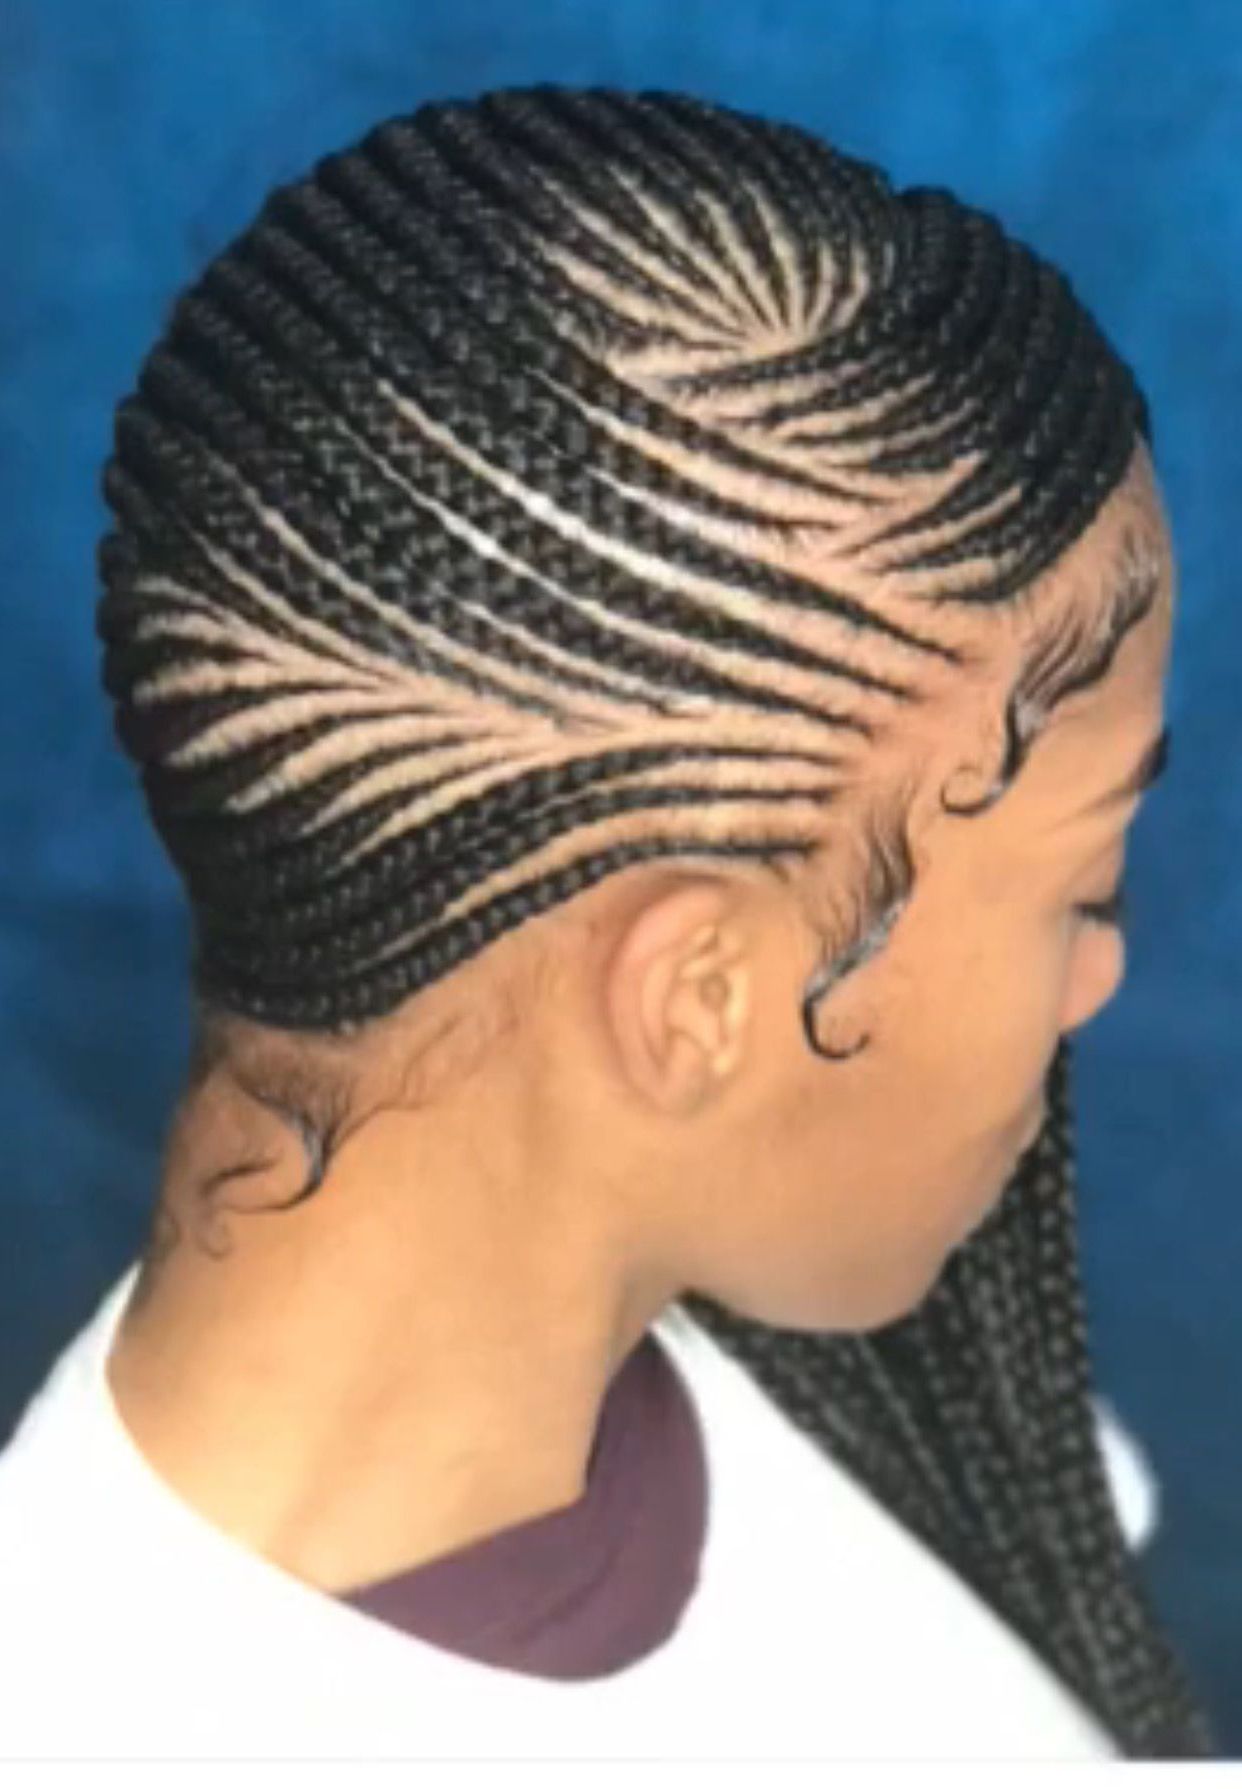 2020 Side Cornrows Braided Hairstyles Within Braids, Feed In Braids, Goddess Braids, Cornrows, Natural (View 4 of 20)